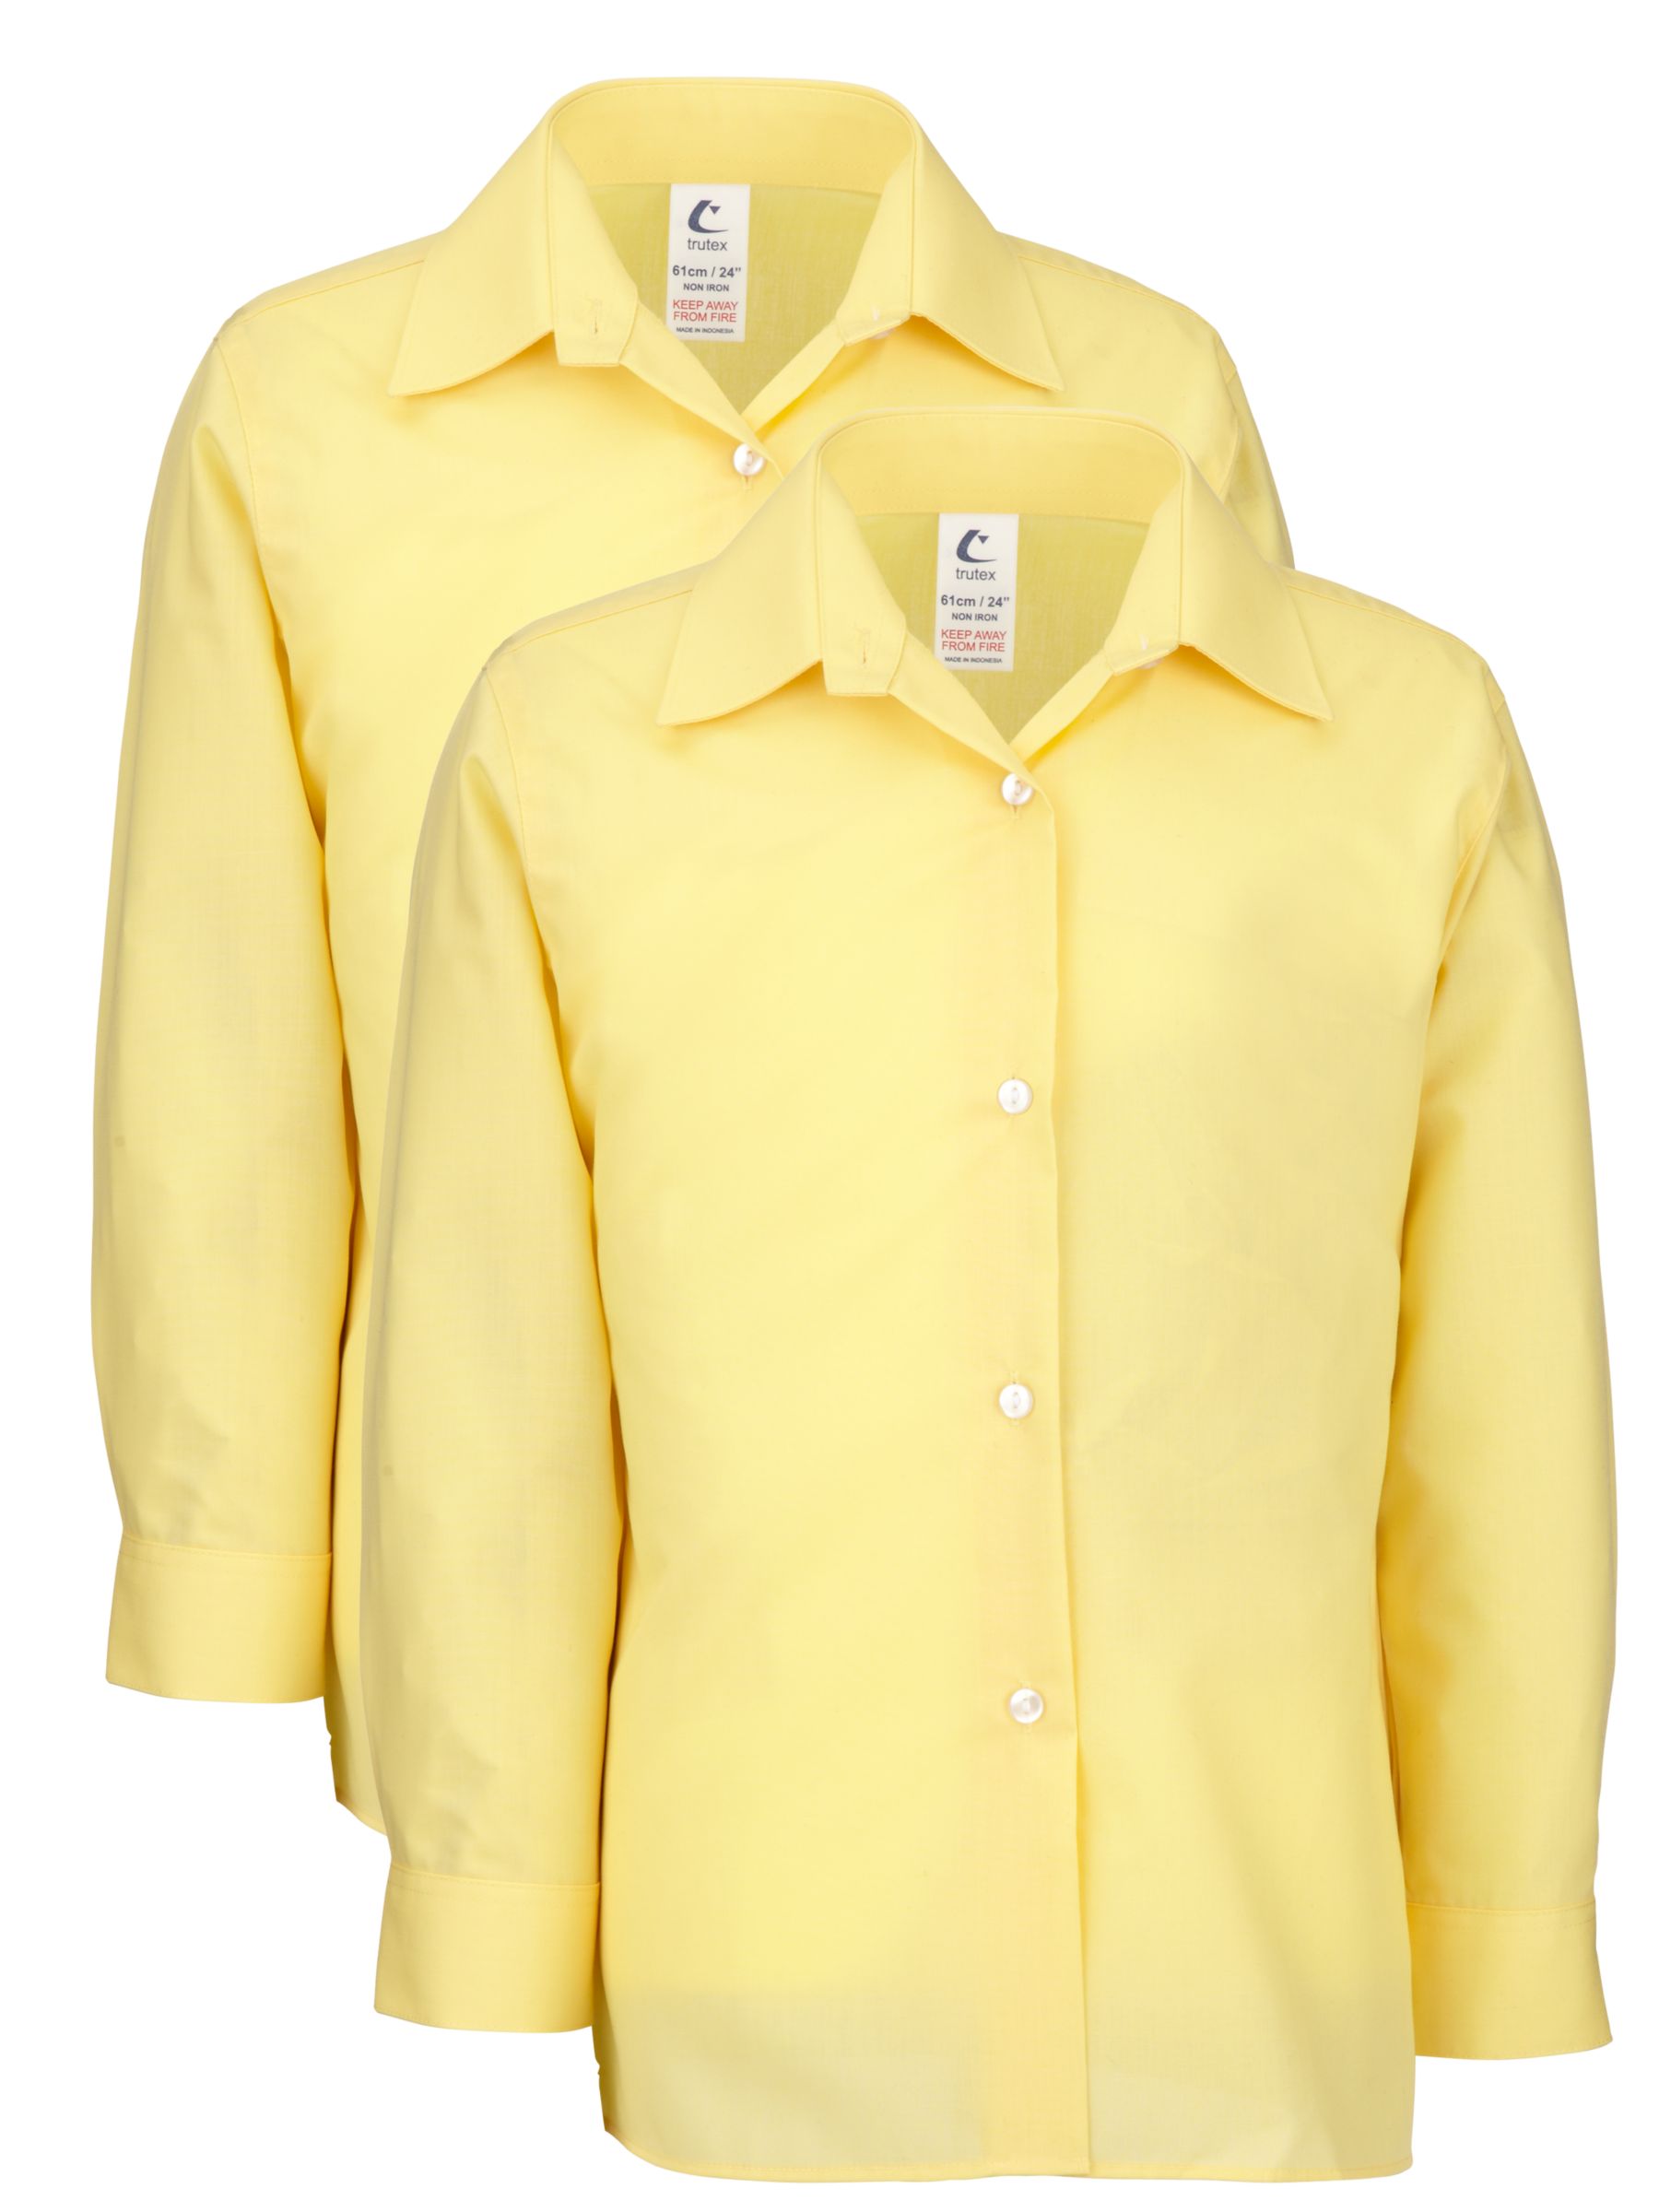 St Louis Primary School Girls Blouse, Pack